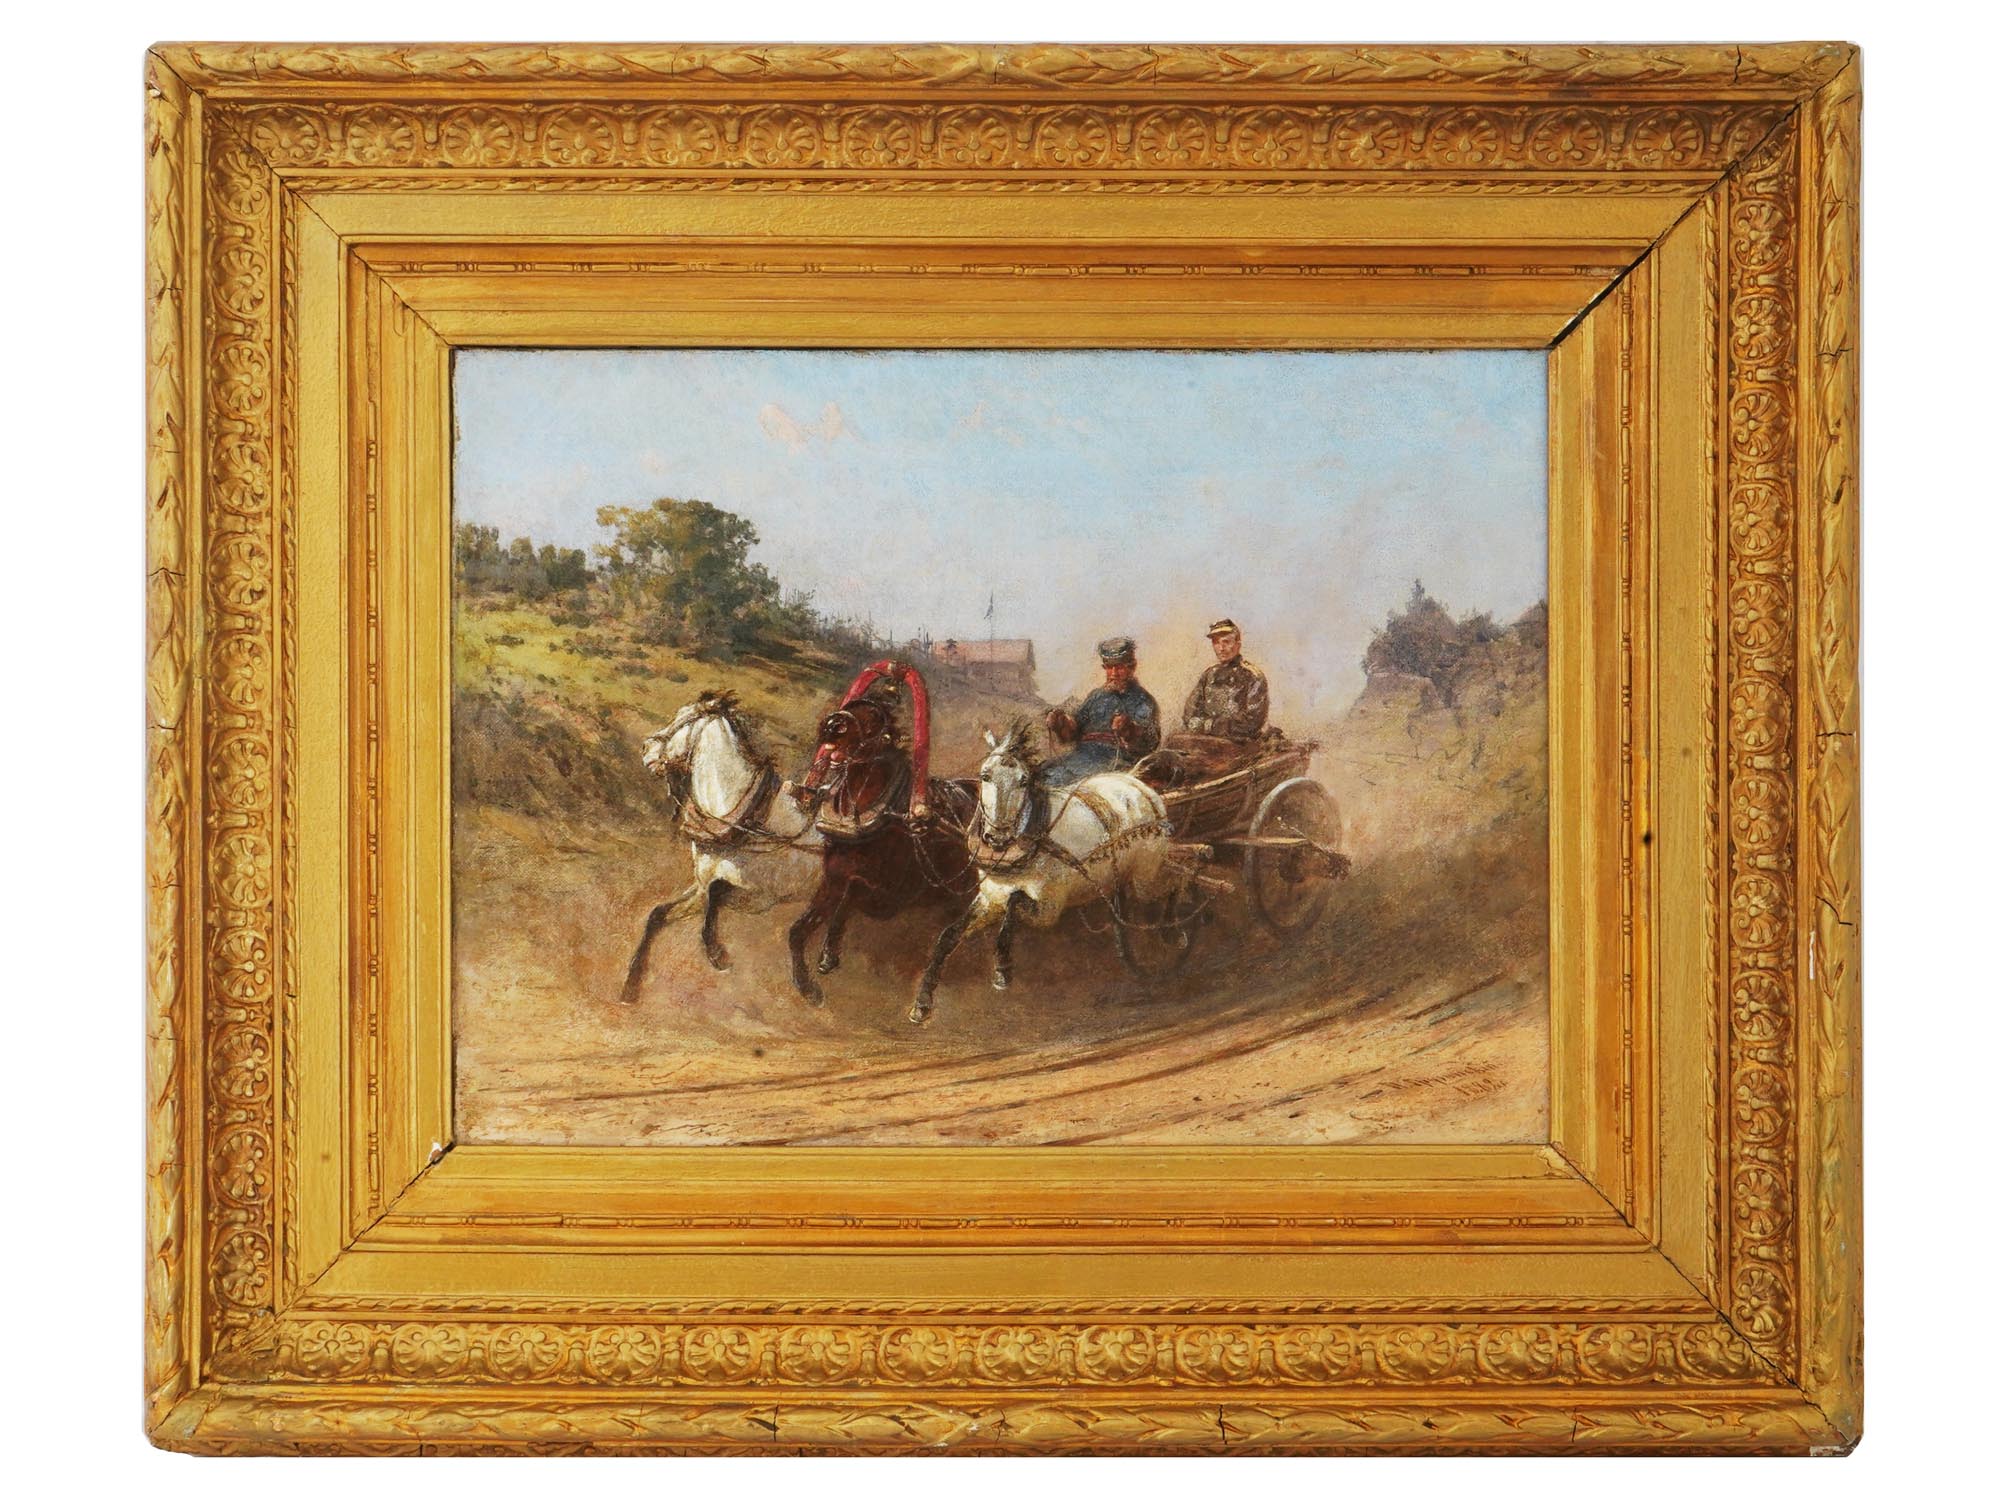 PETR GRUZINSKY ANTIQUE 19TH C RUSSIAN OIL PAINTING PIC-0